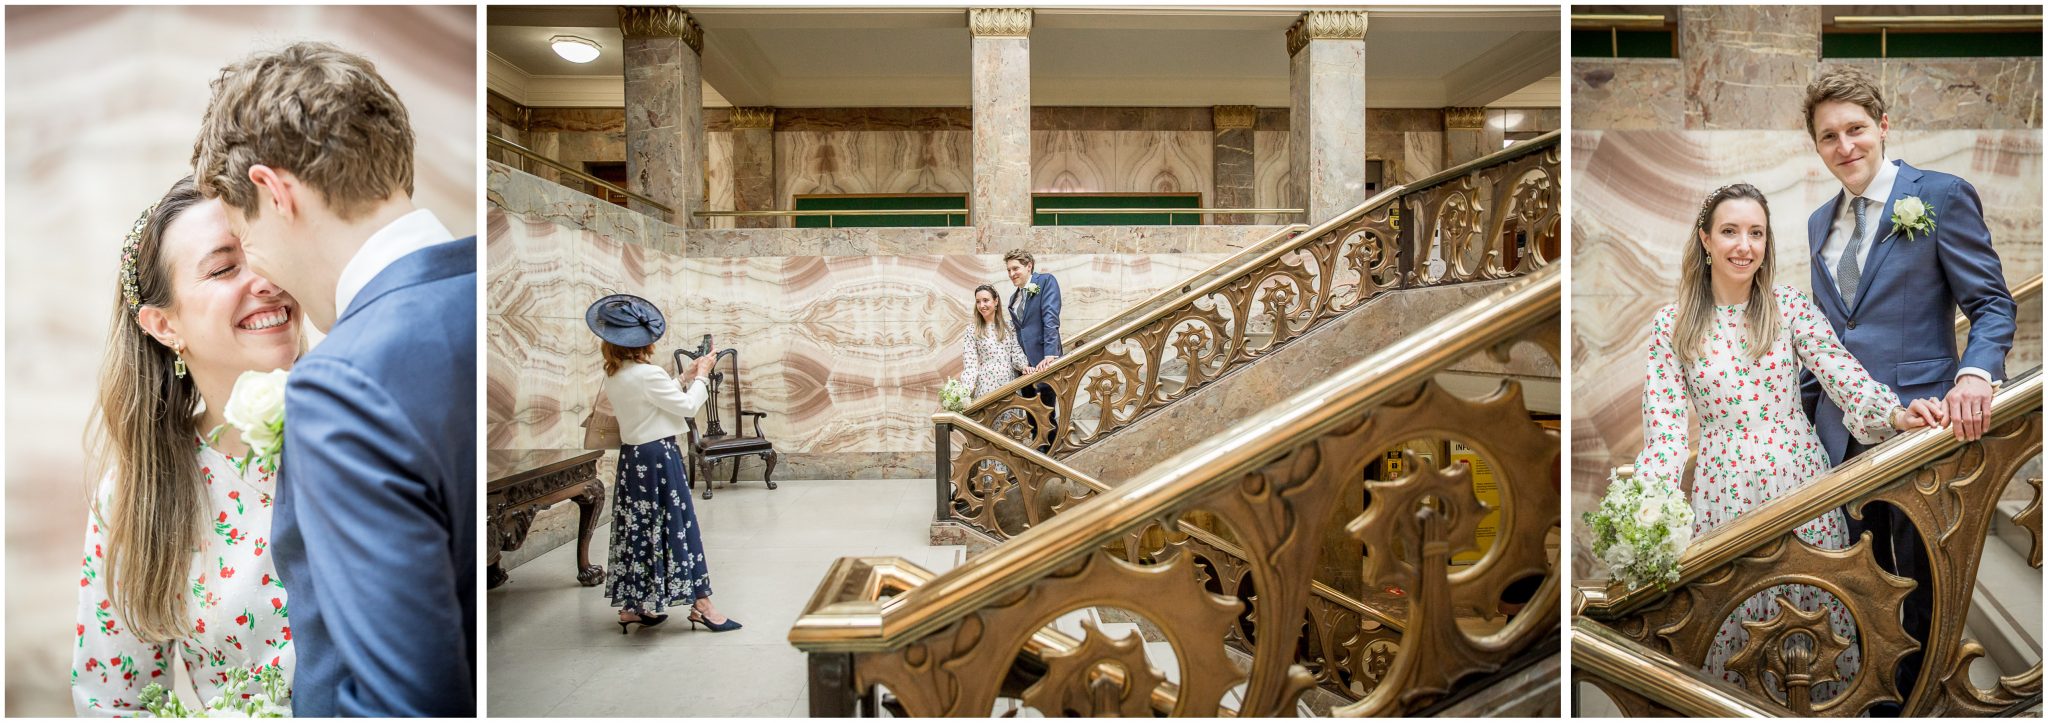 Couple photos by the elaborate staircase